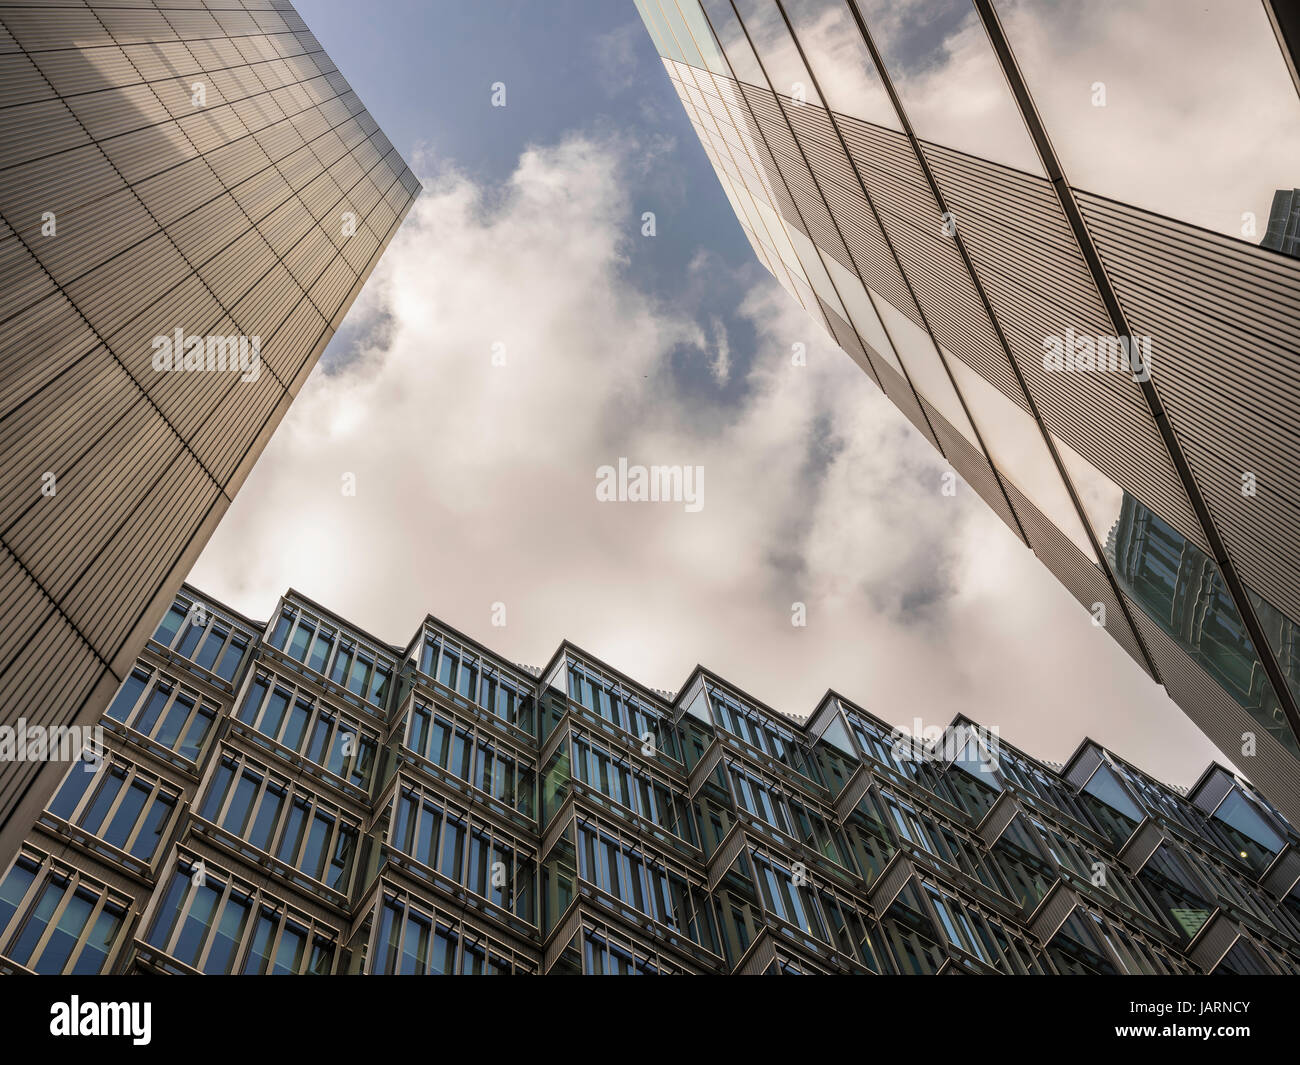 London-UK, April 13th, 2017: London Docklands skyscrapers. Low wide angle view of converging skyscrapers in the business district. Stock Photo